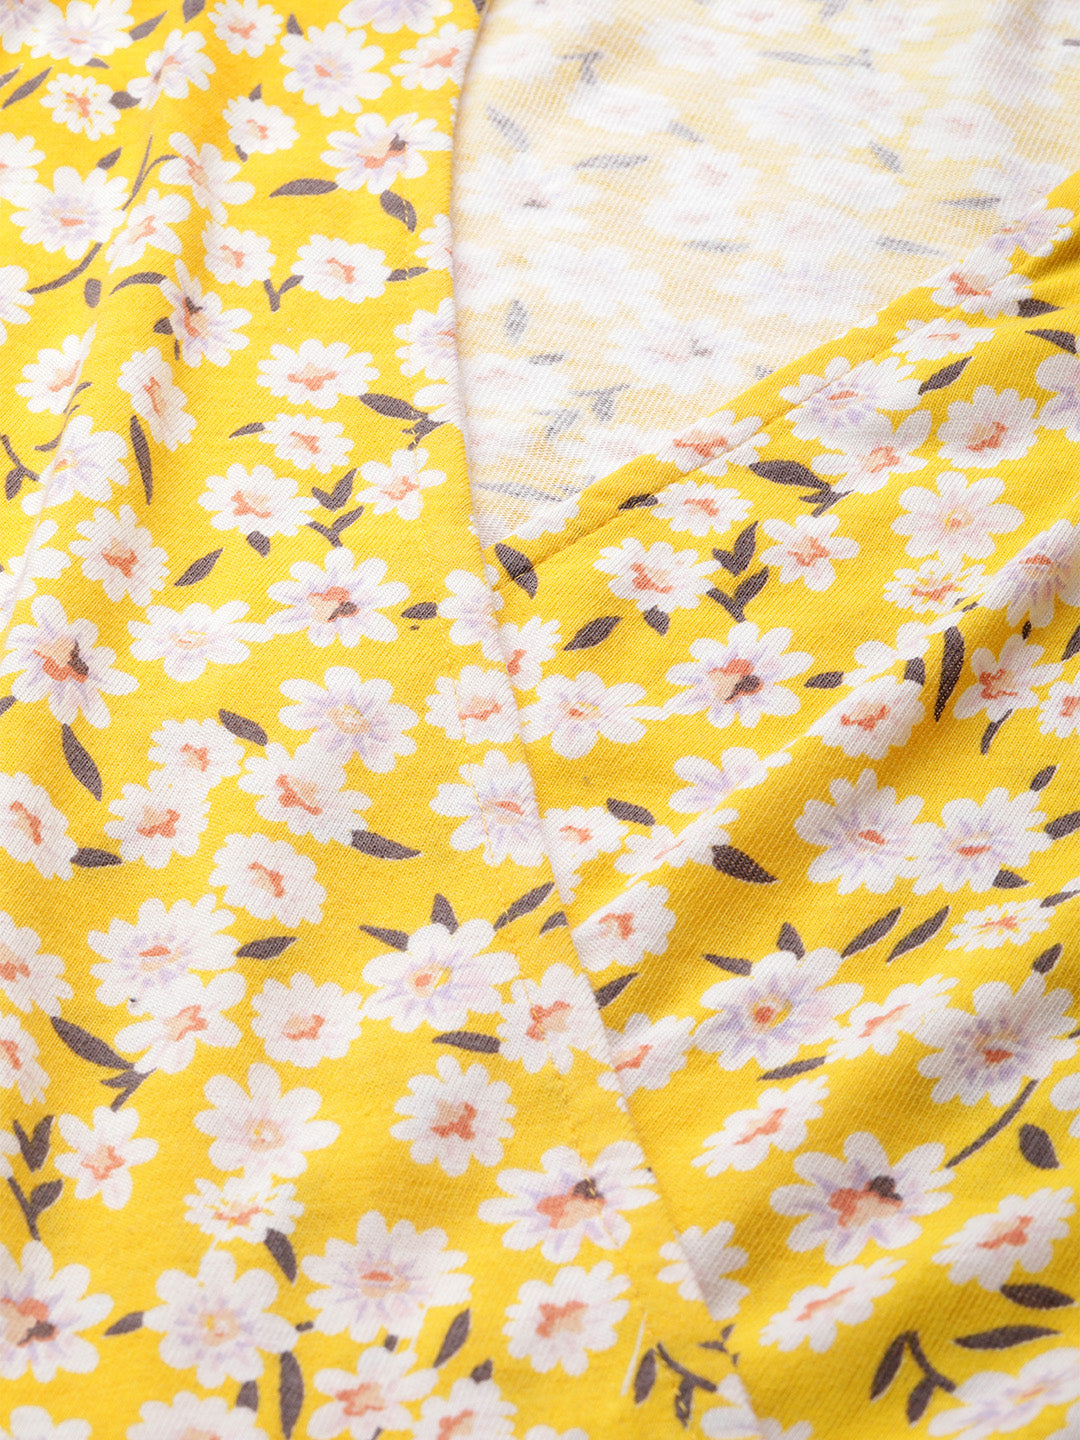 Yellow Ditsy Floral Wrap Skater Dress